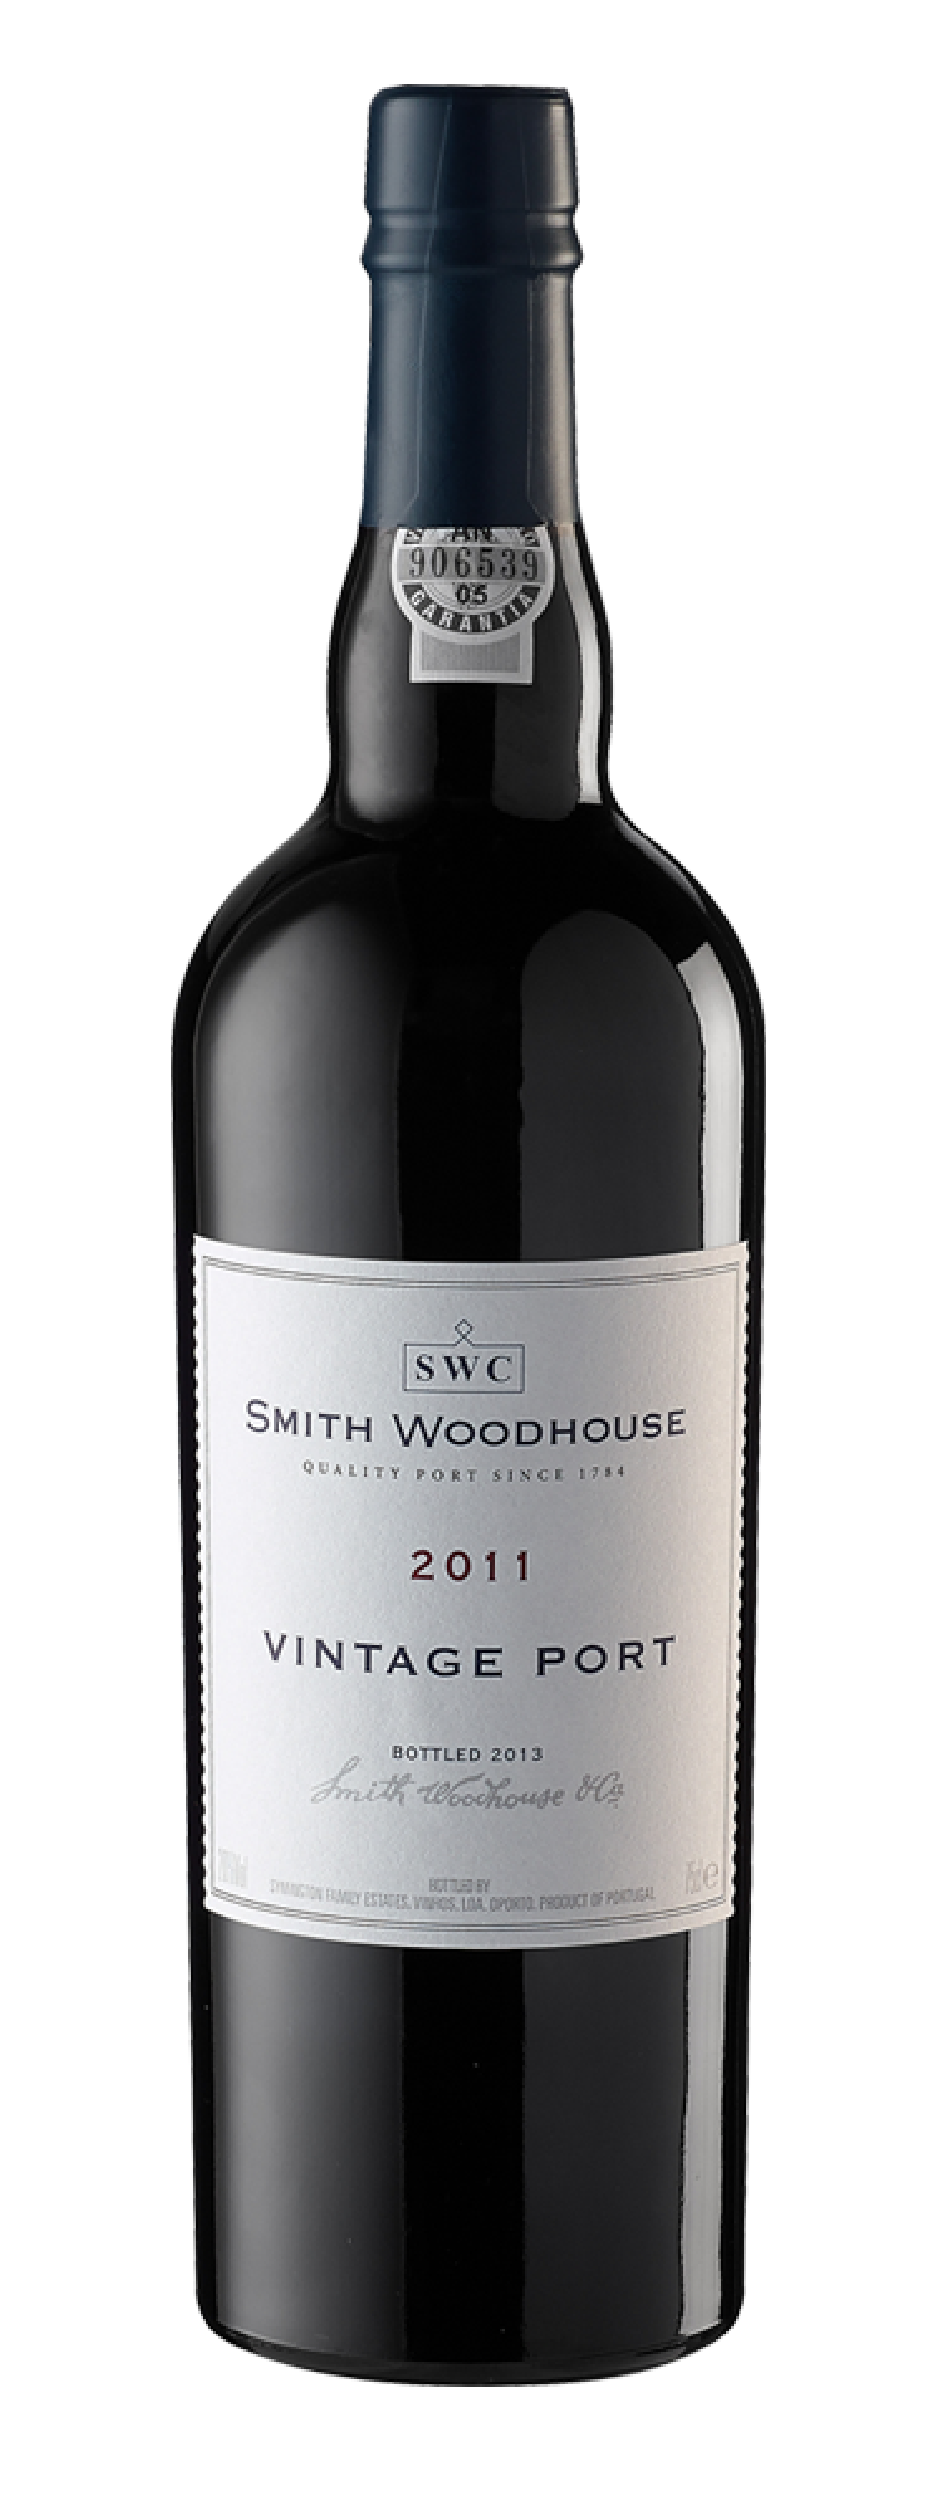 Product Image for SMITH WOODHOUSE VINTAGE PORT 2011